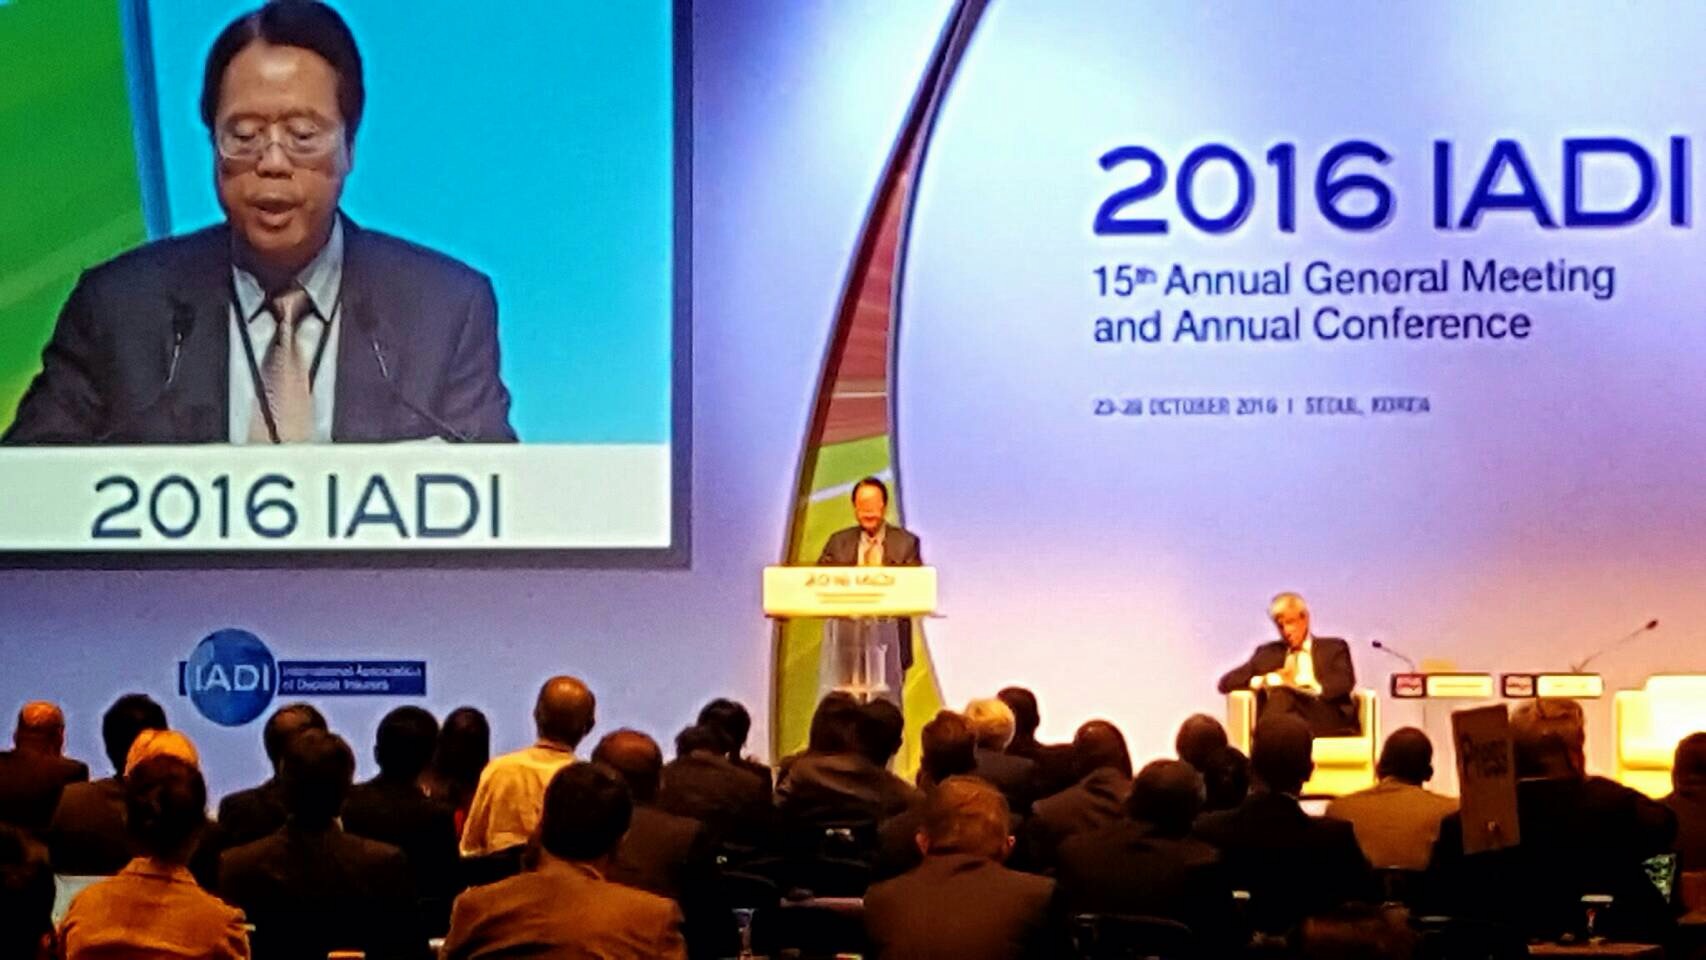 Photo of CDIC Chairman Dr. Paul C. D. Lei as speaker of the session “What is an Appropriate Funding Framework to Address a Crisis?”